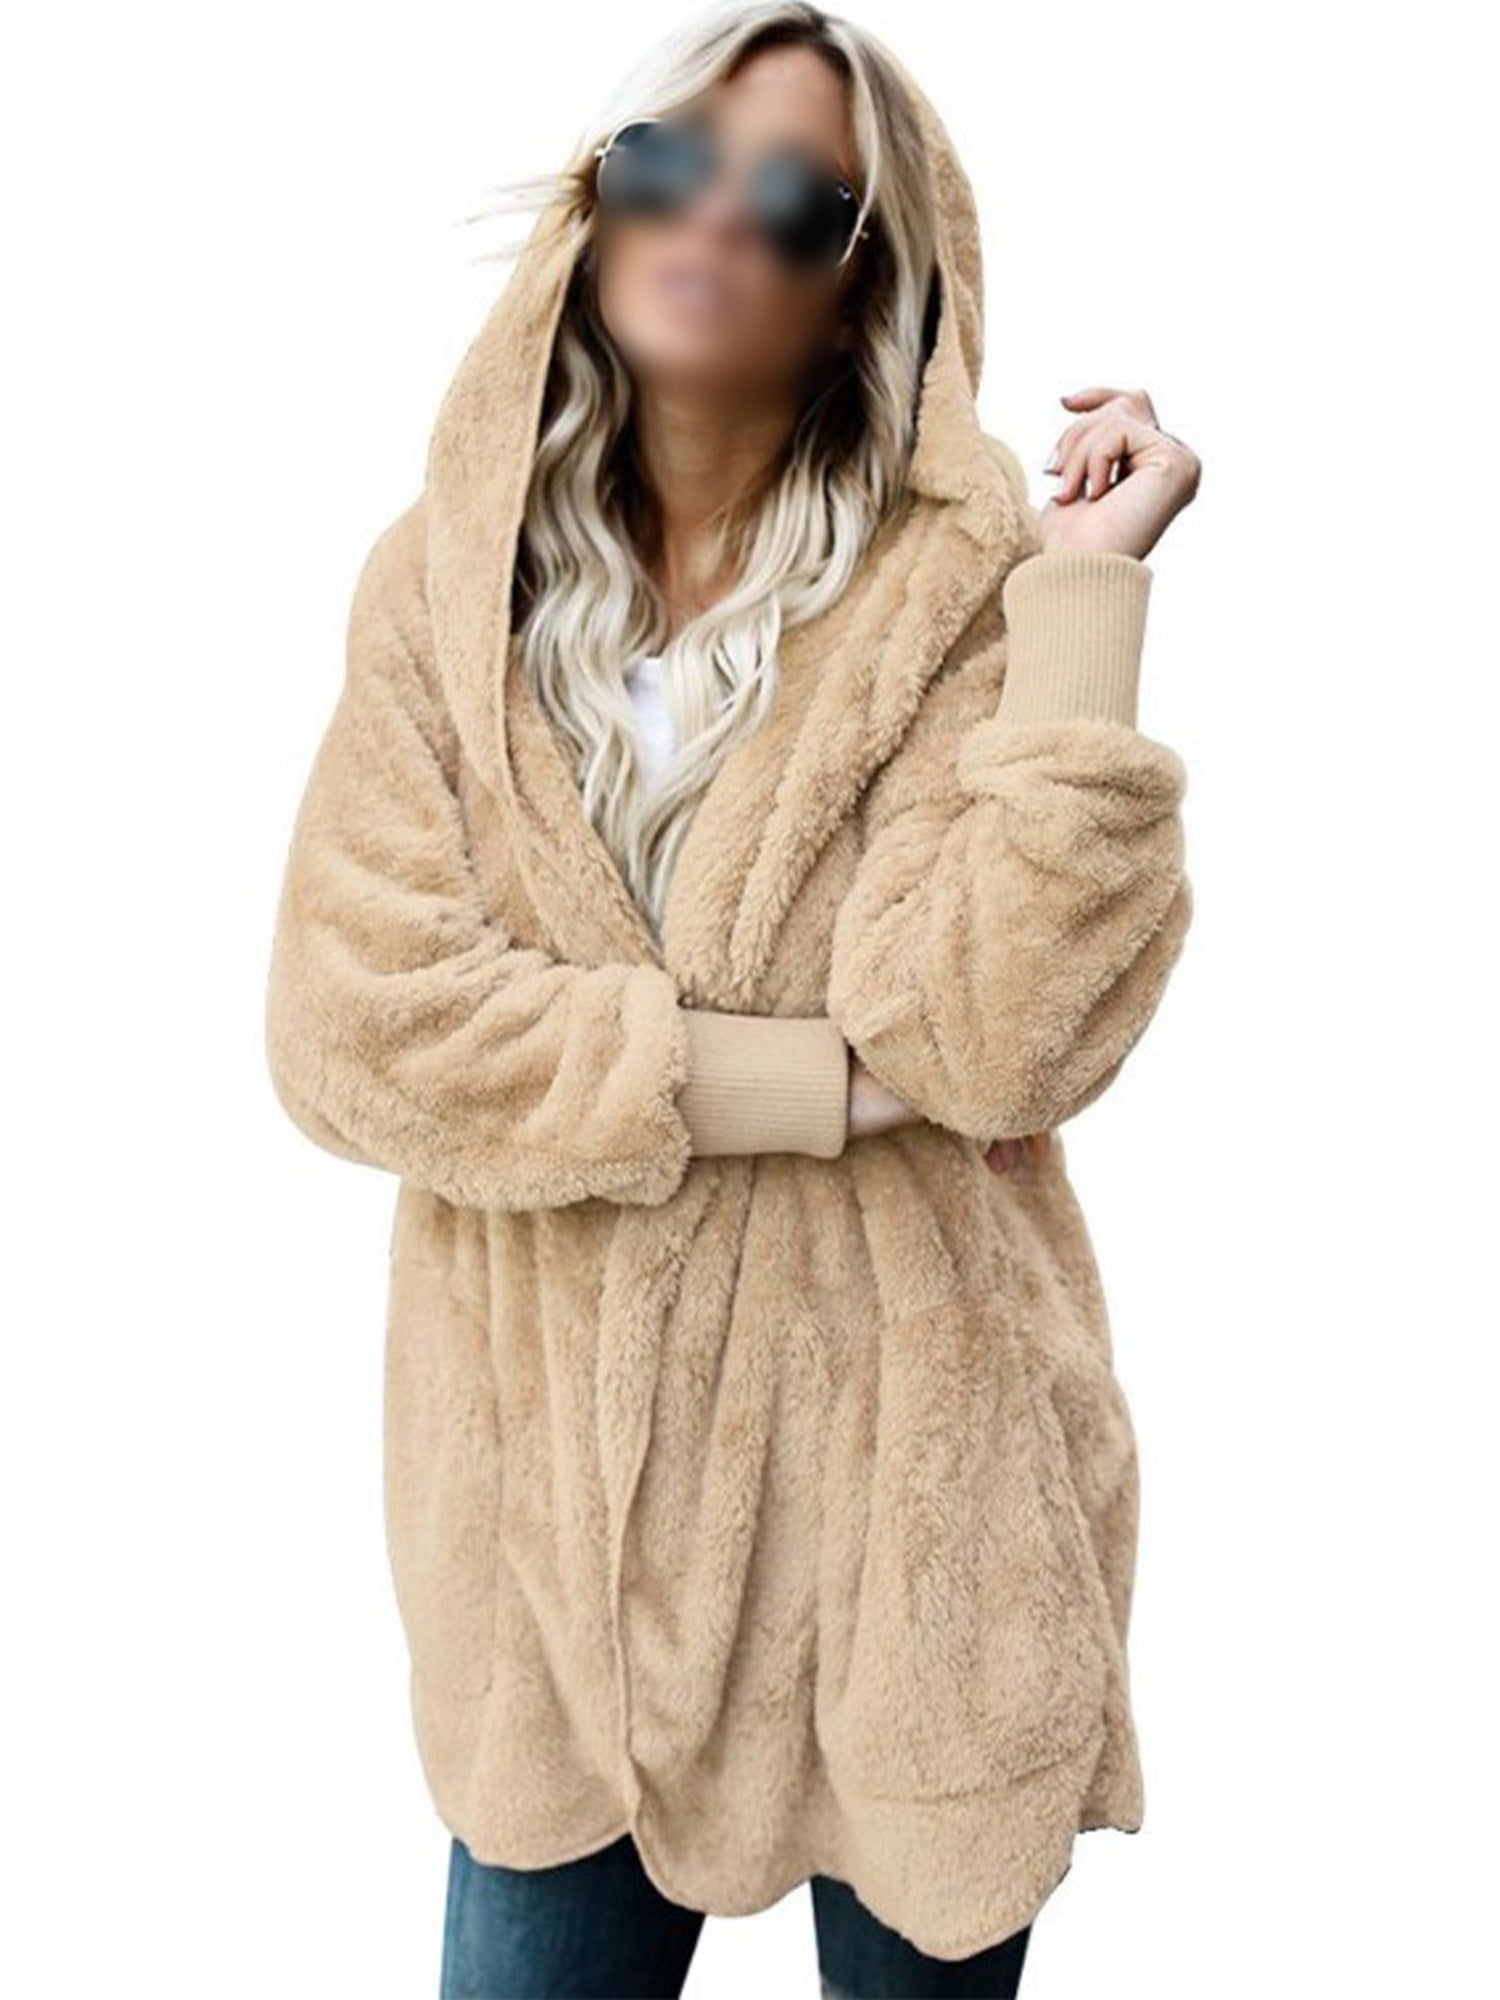 Details about   Blanket Sweatshirt Hoodie Ultra Plush Soft Winter Hooded Coats Gift for Women 